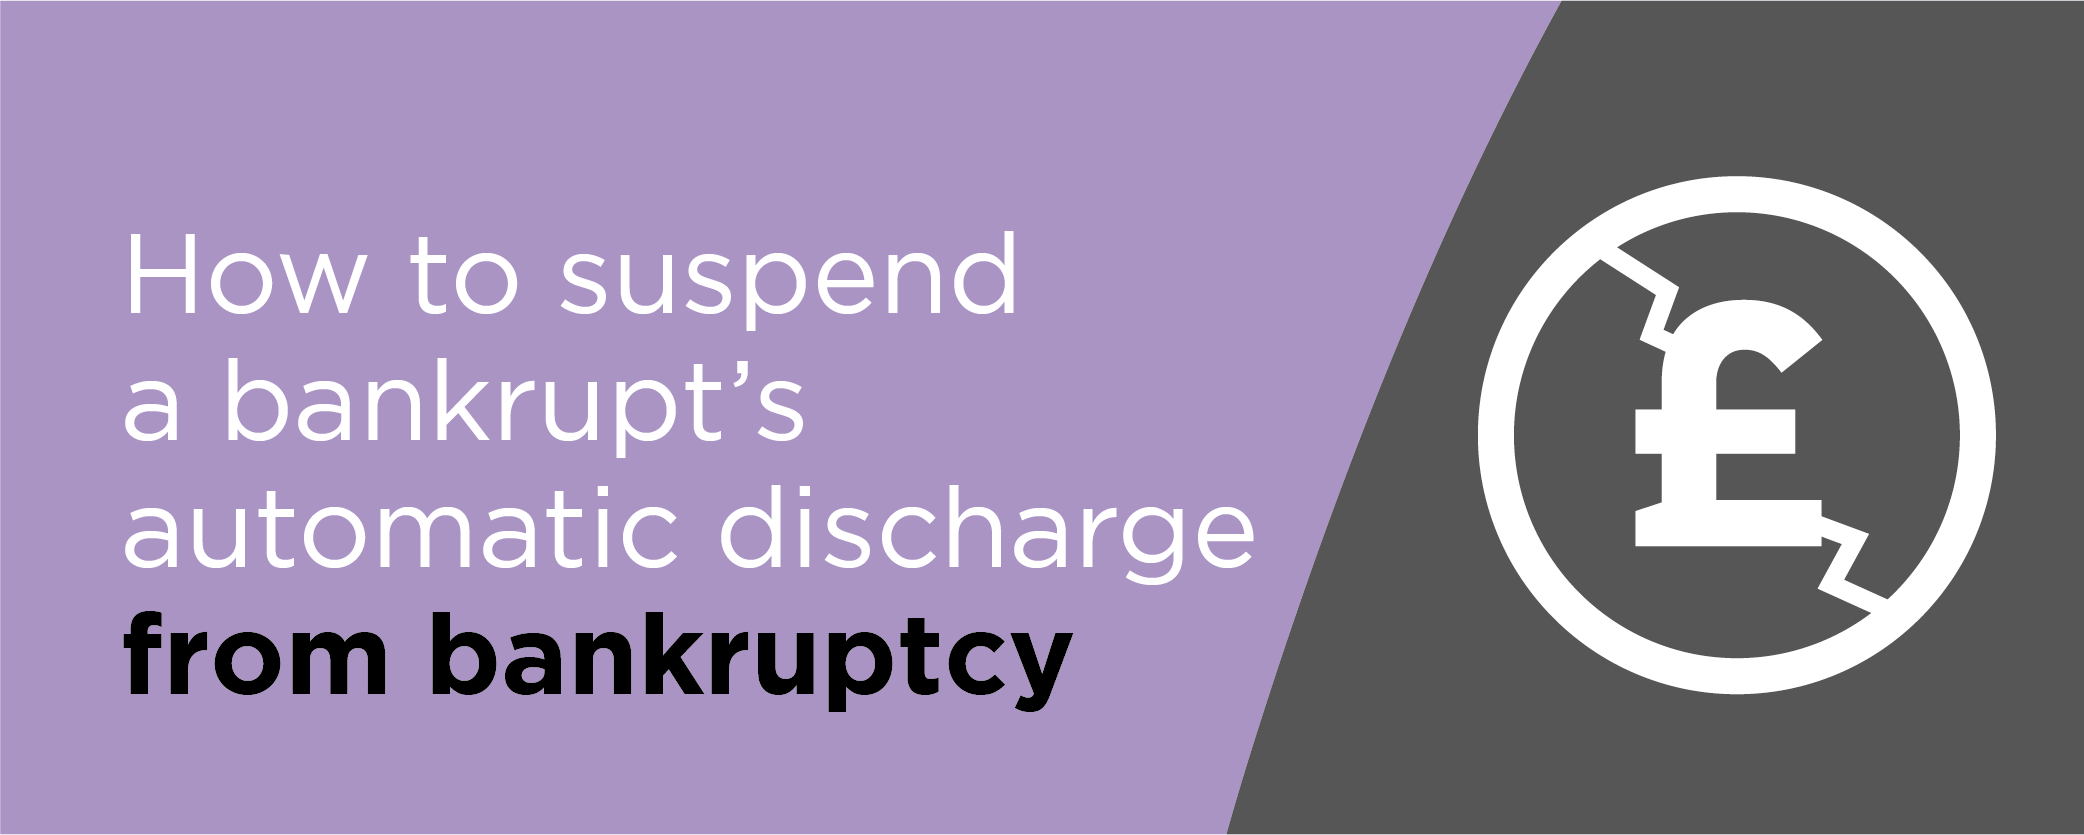 How to suspend a bankrupts automatic discharge from bankruptcy